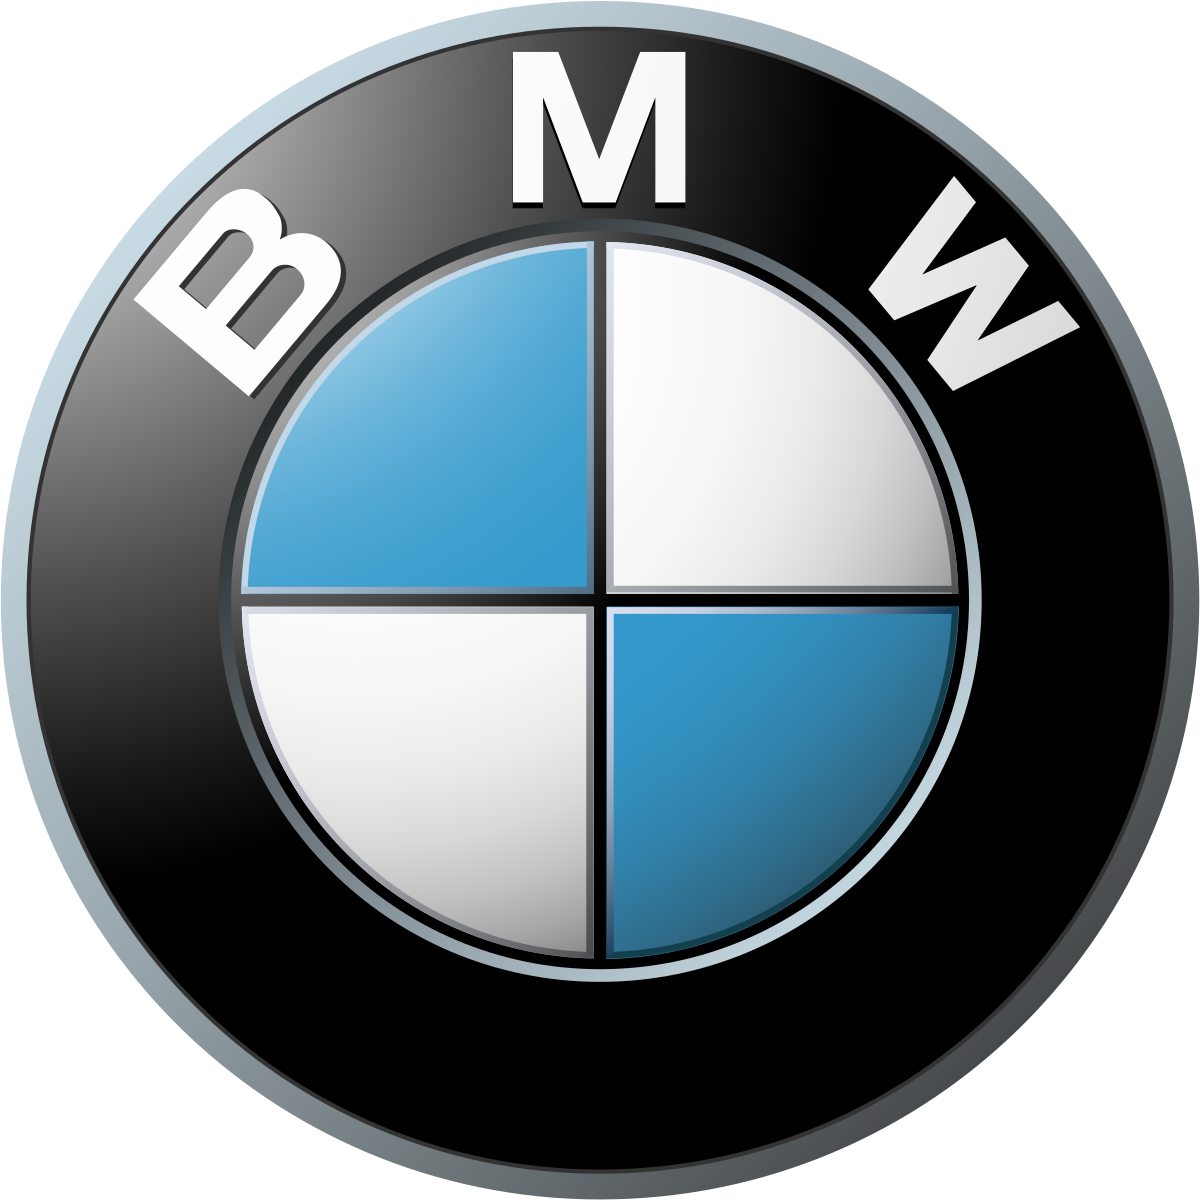 BMW exploring energy investments to reduce dependence on natural gas 